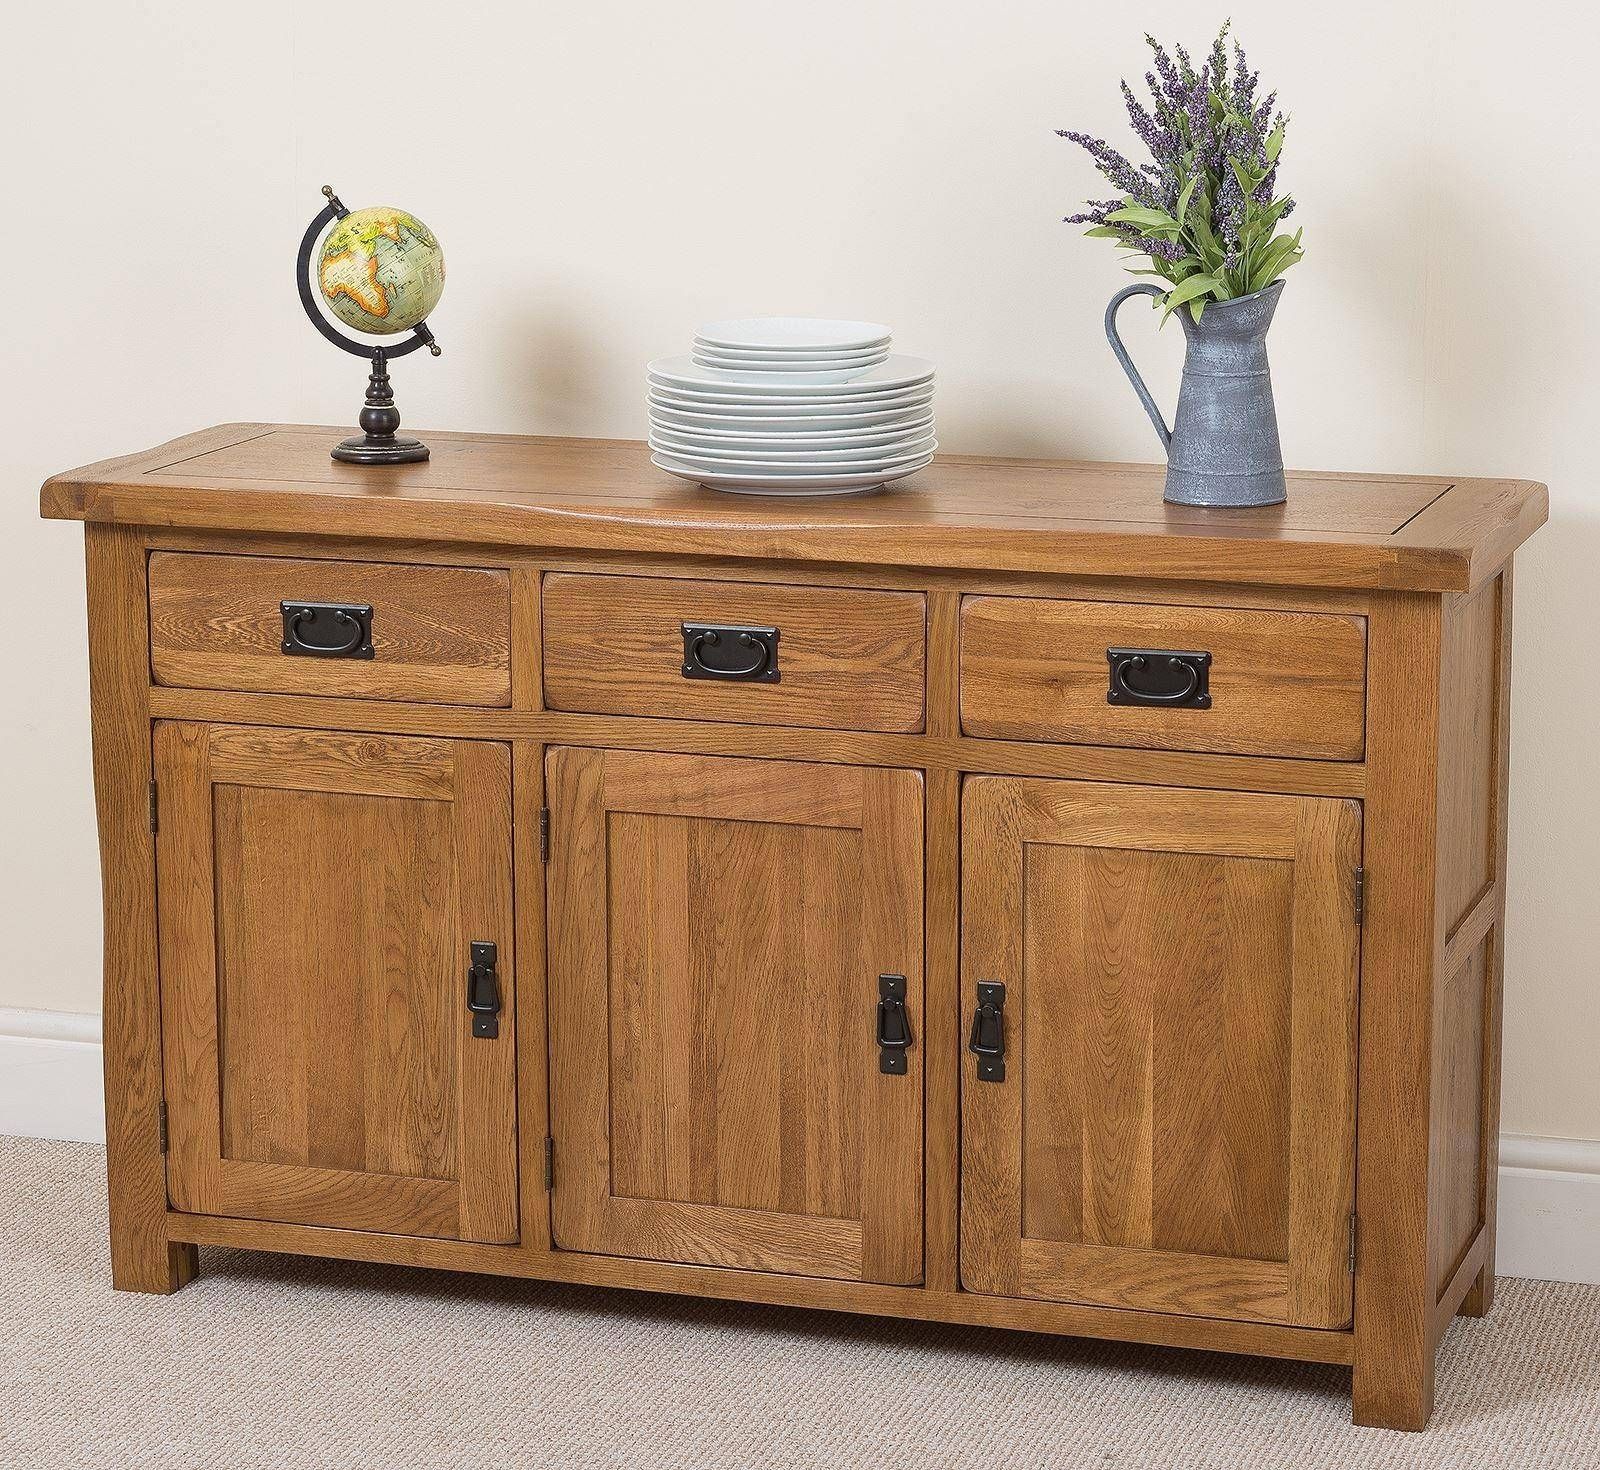 Cotswold Large Oak Sideboard | Free Uk Delivery With Most Popular Large Sideboards (View 13 of 15)